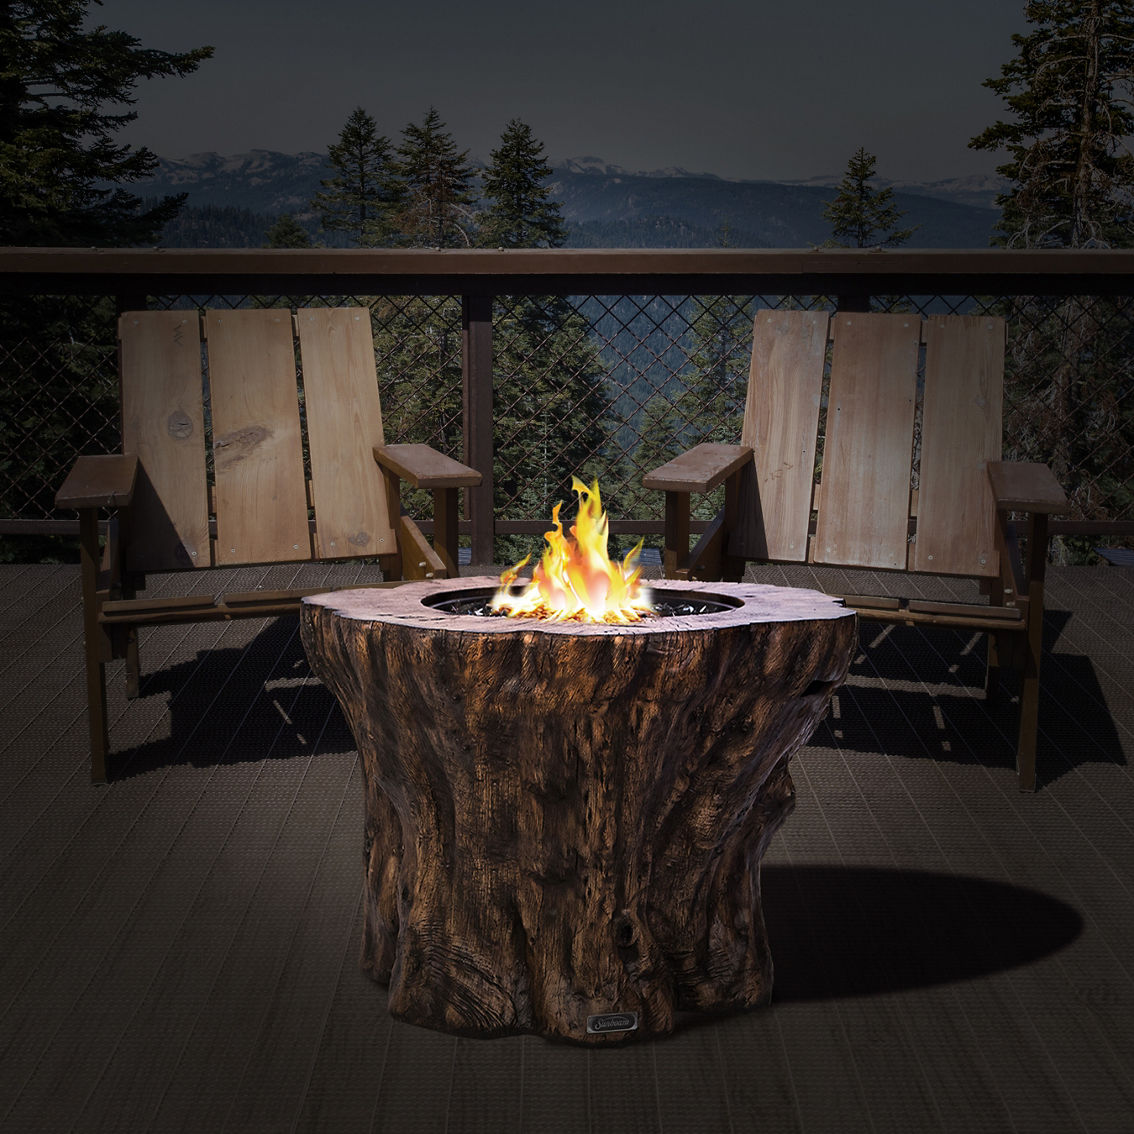 Sunbeam Pioneer Brown Thermoset Resin Fire Pit - Image 5 of 6